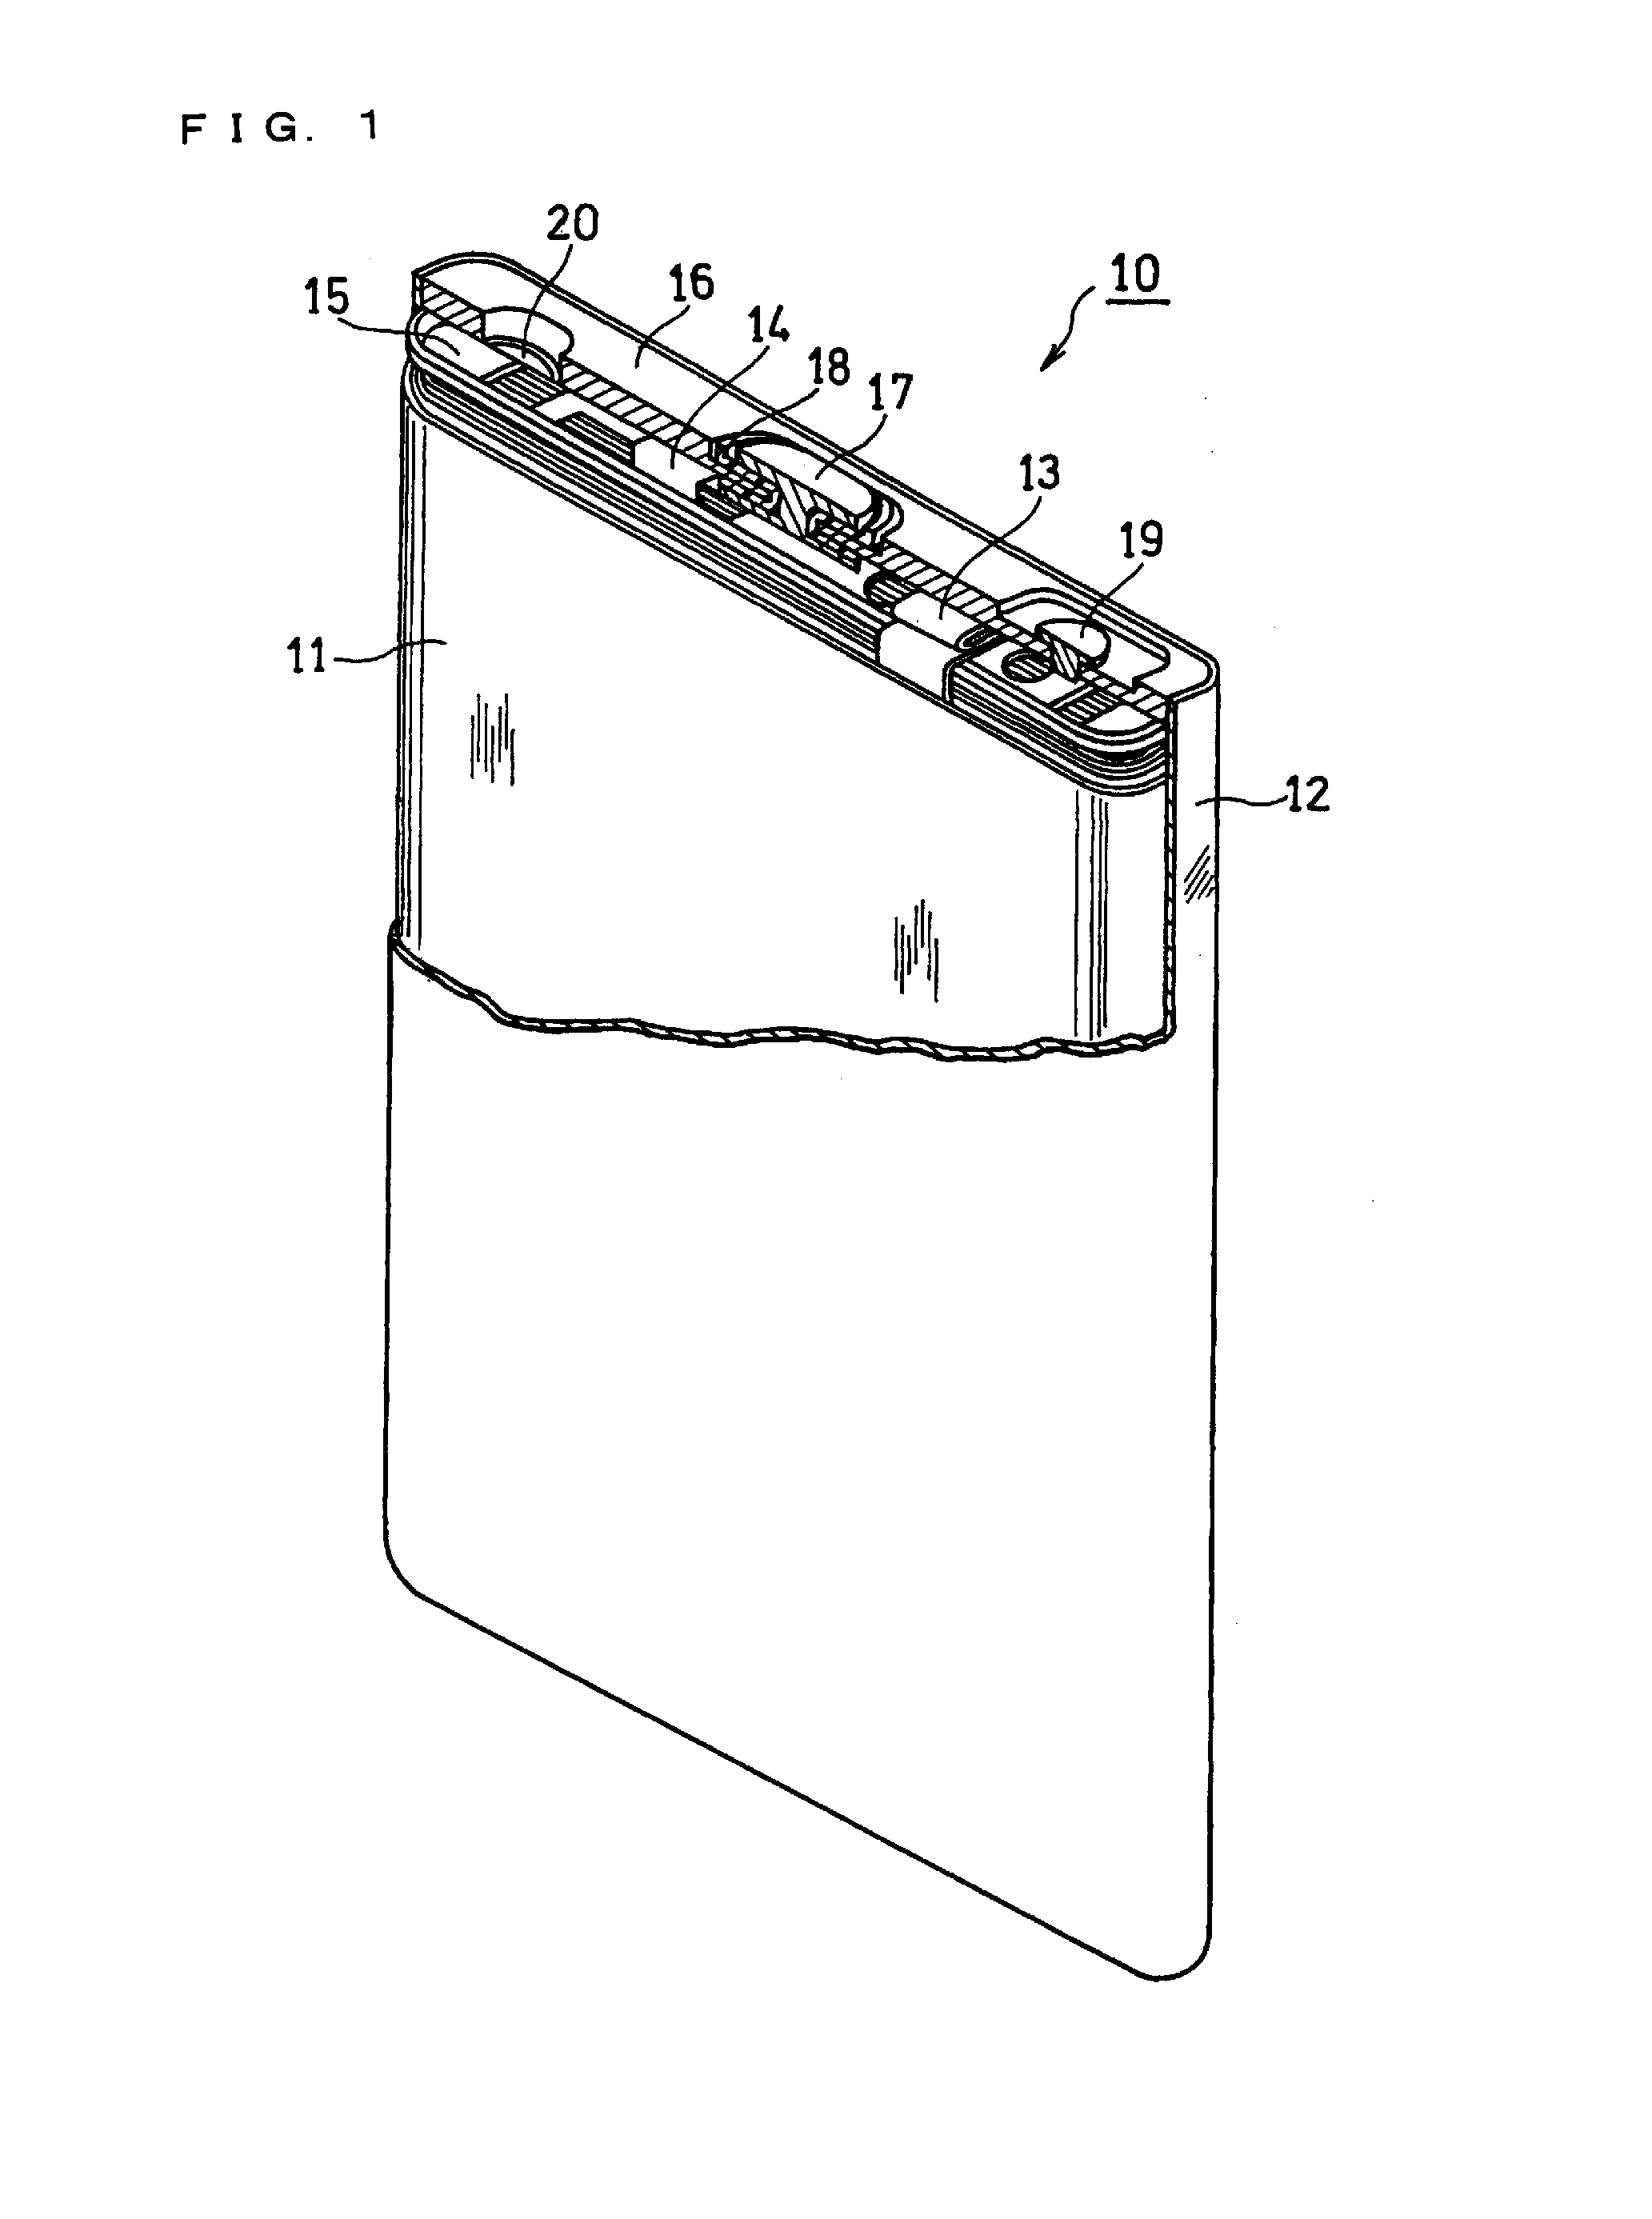 Non-aqueous electrolyte secondary battery and method for producing the same